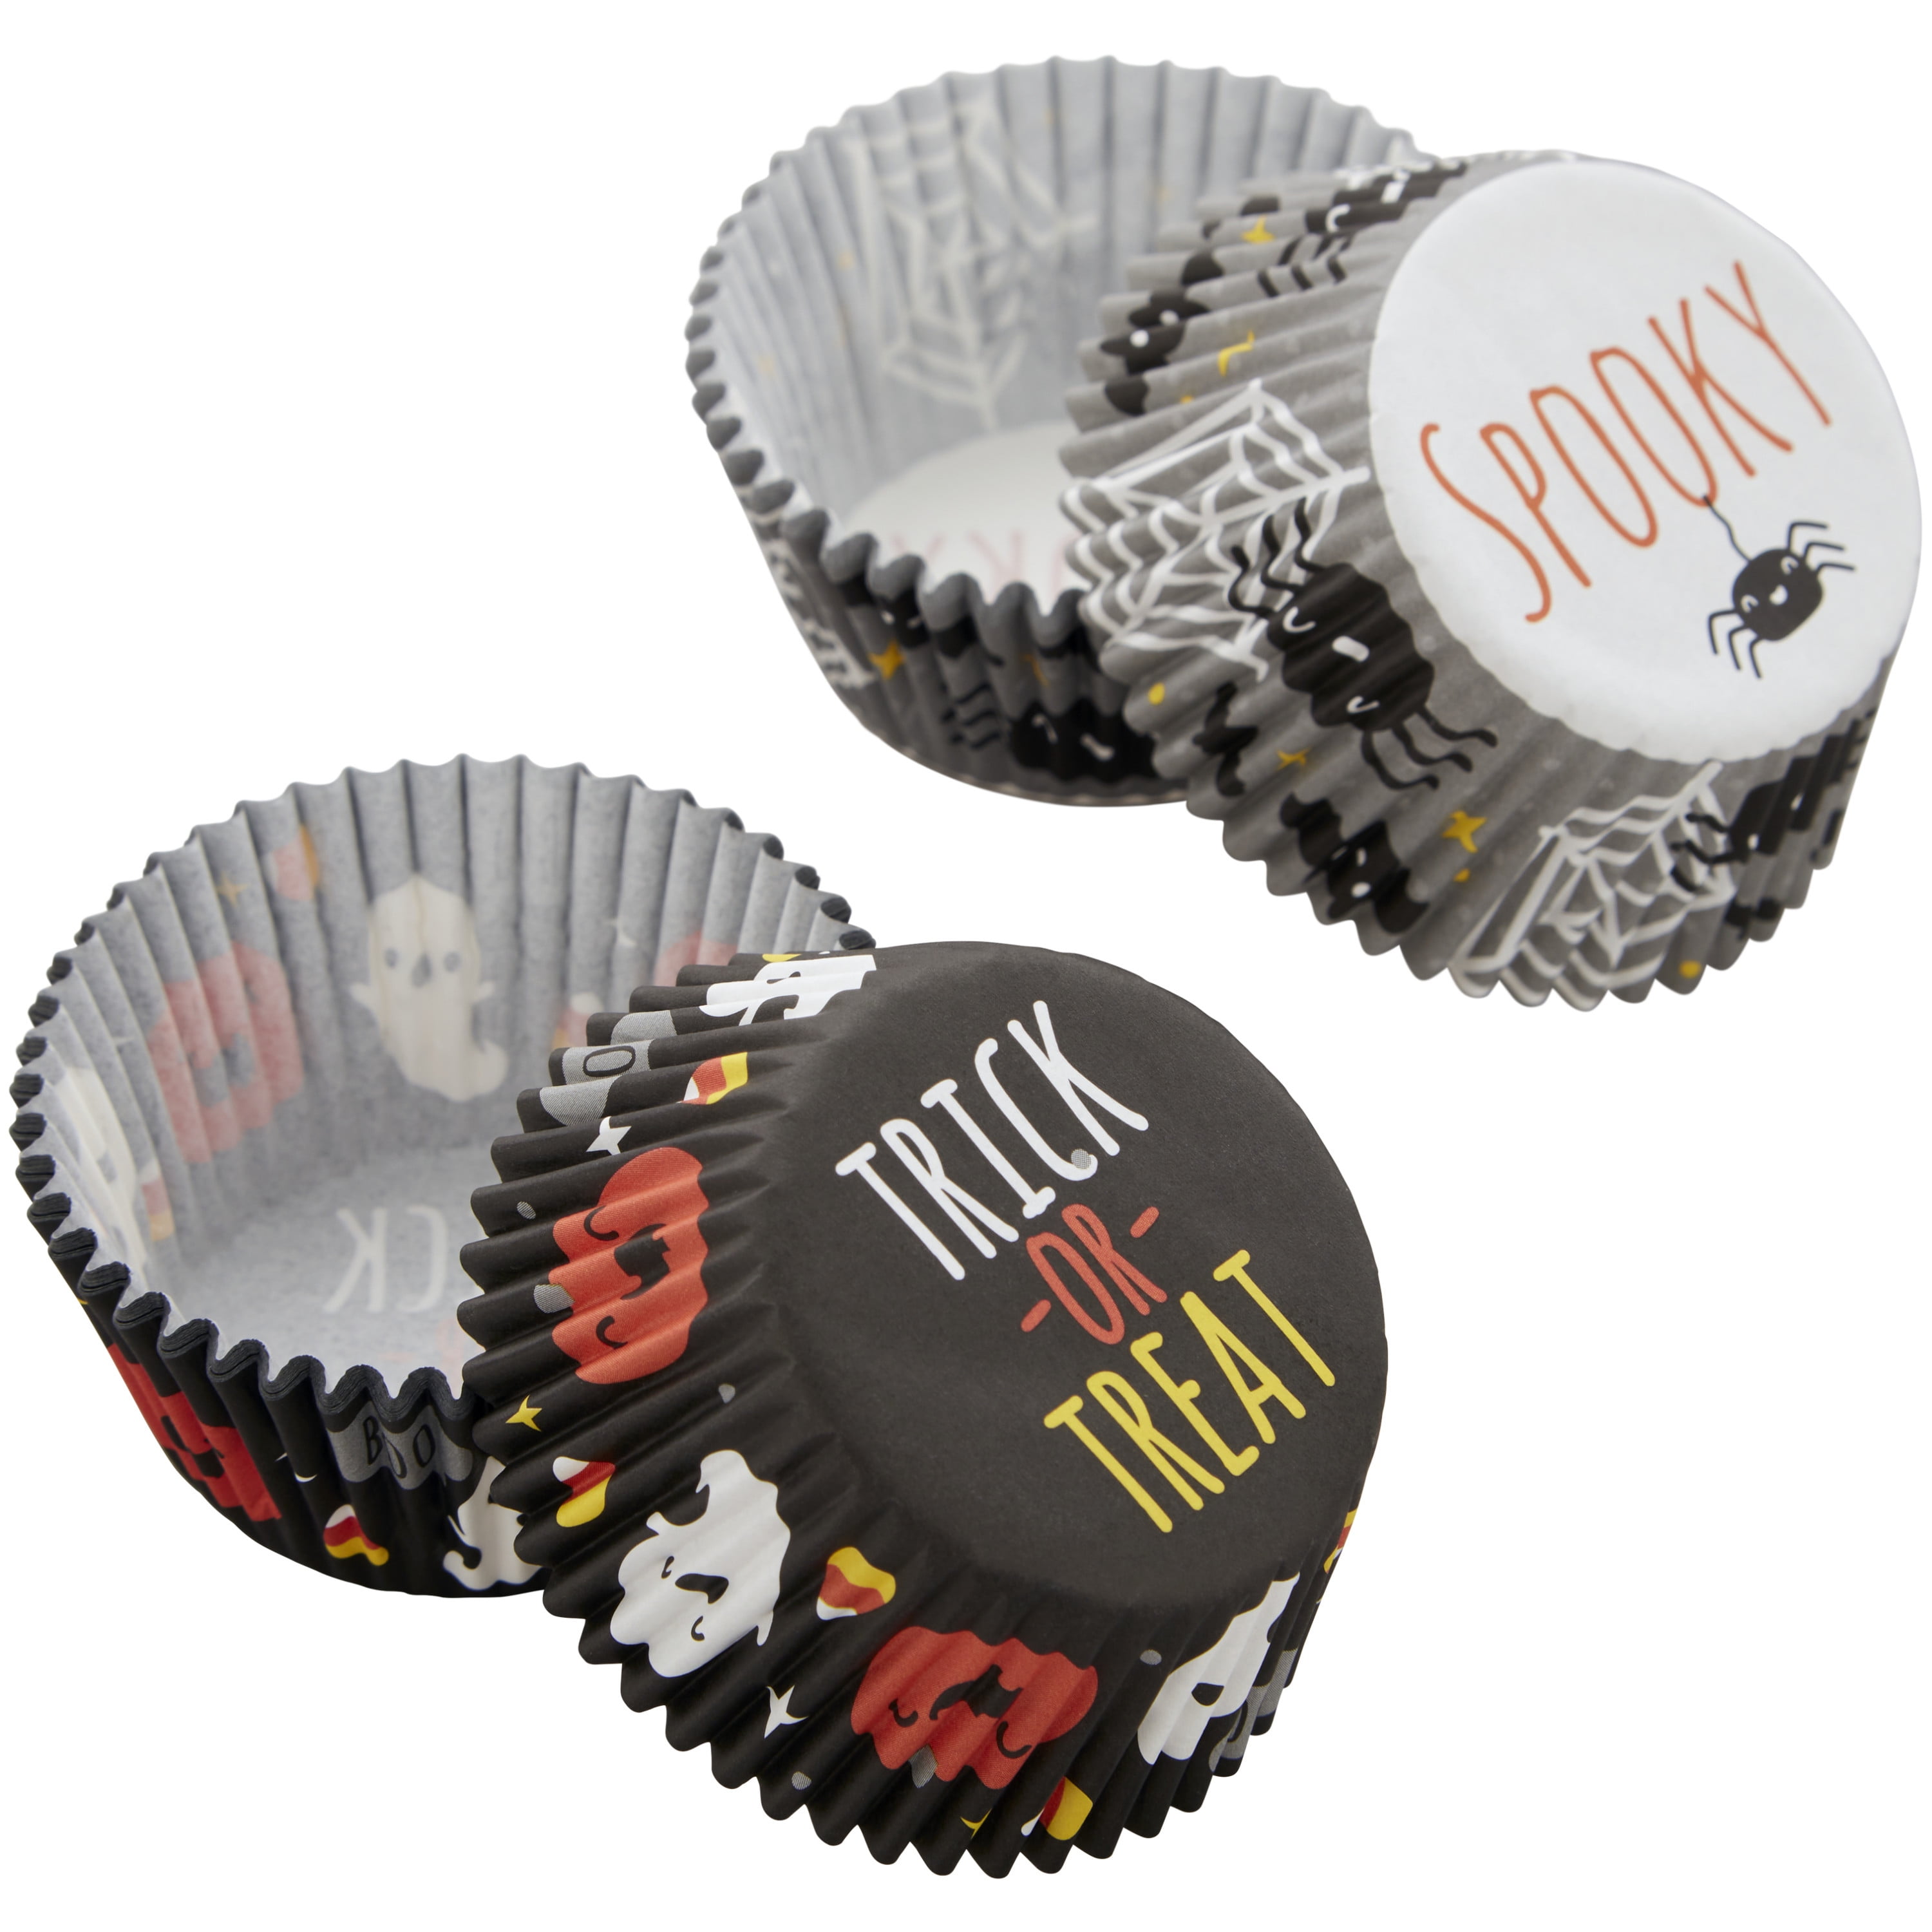 Great Value Trick or Treat" and Spooky" Paper Halloween Cupcake Liners, 48-Count